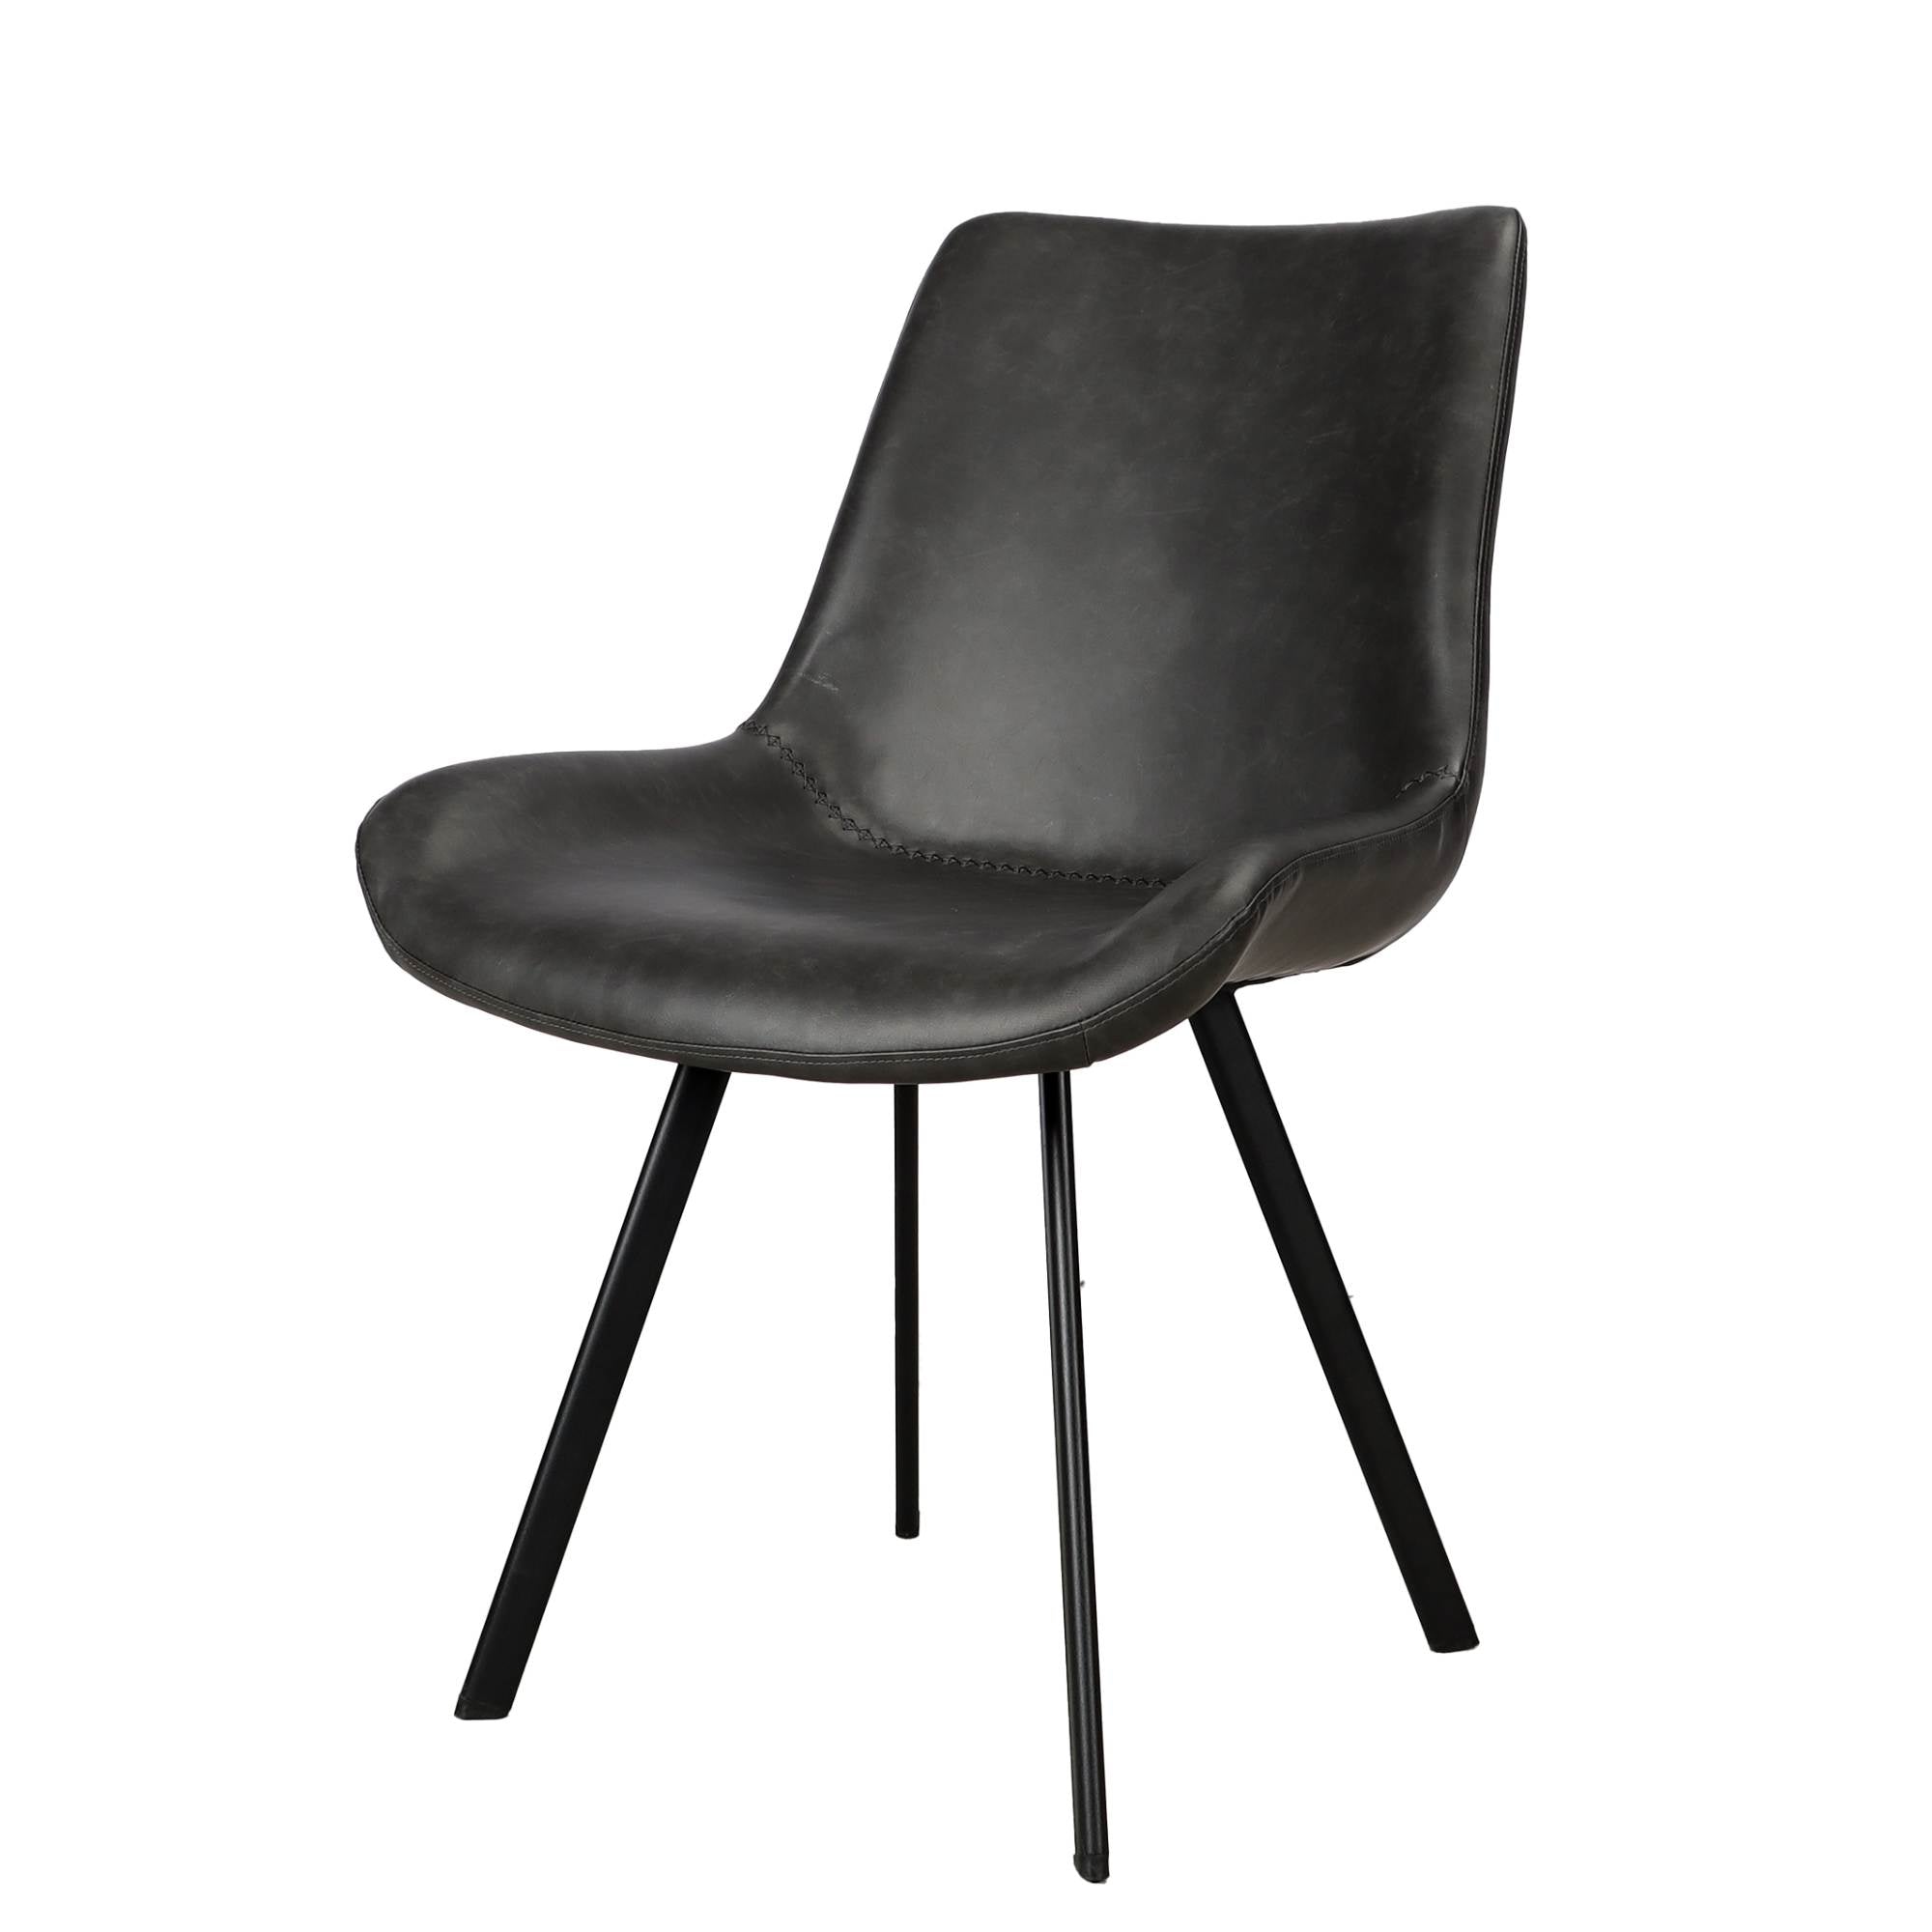 Darby Dining Chair Black